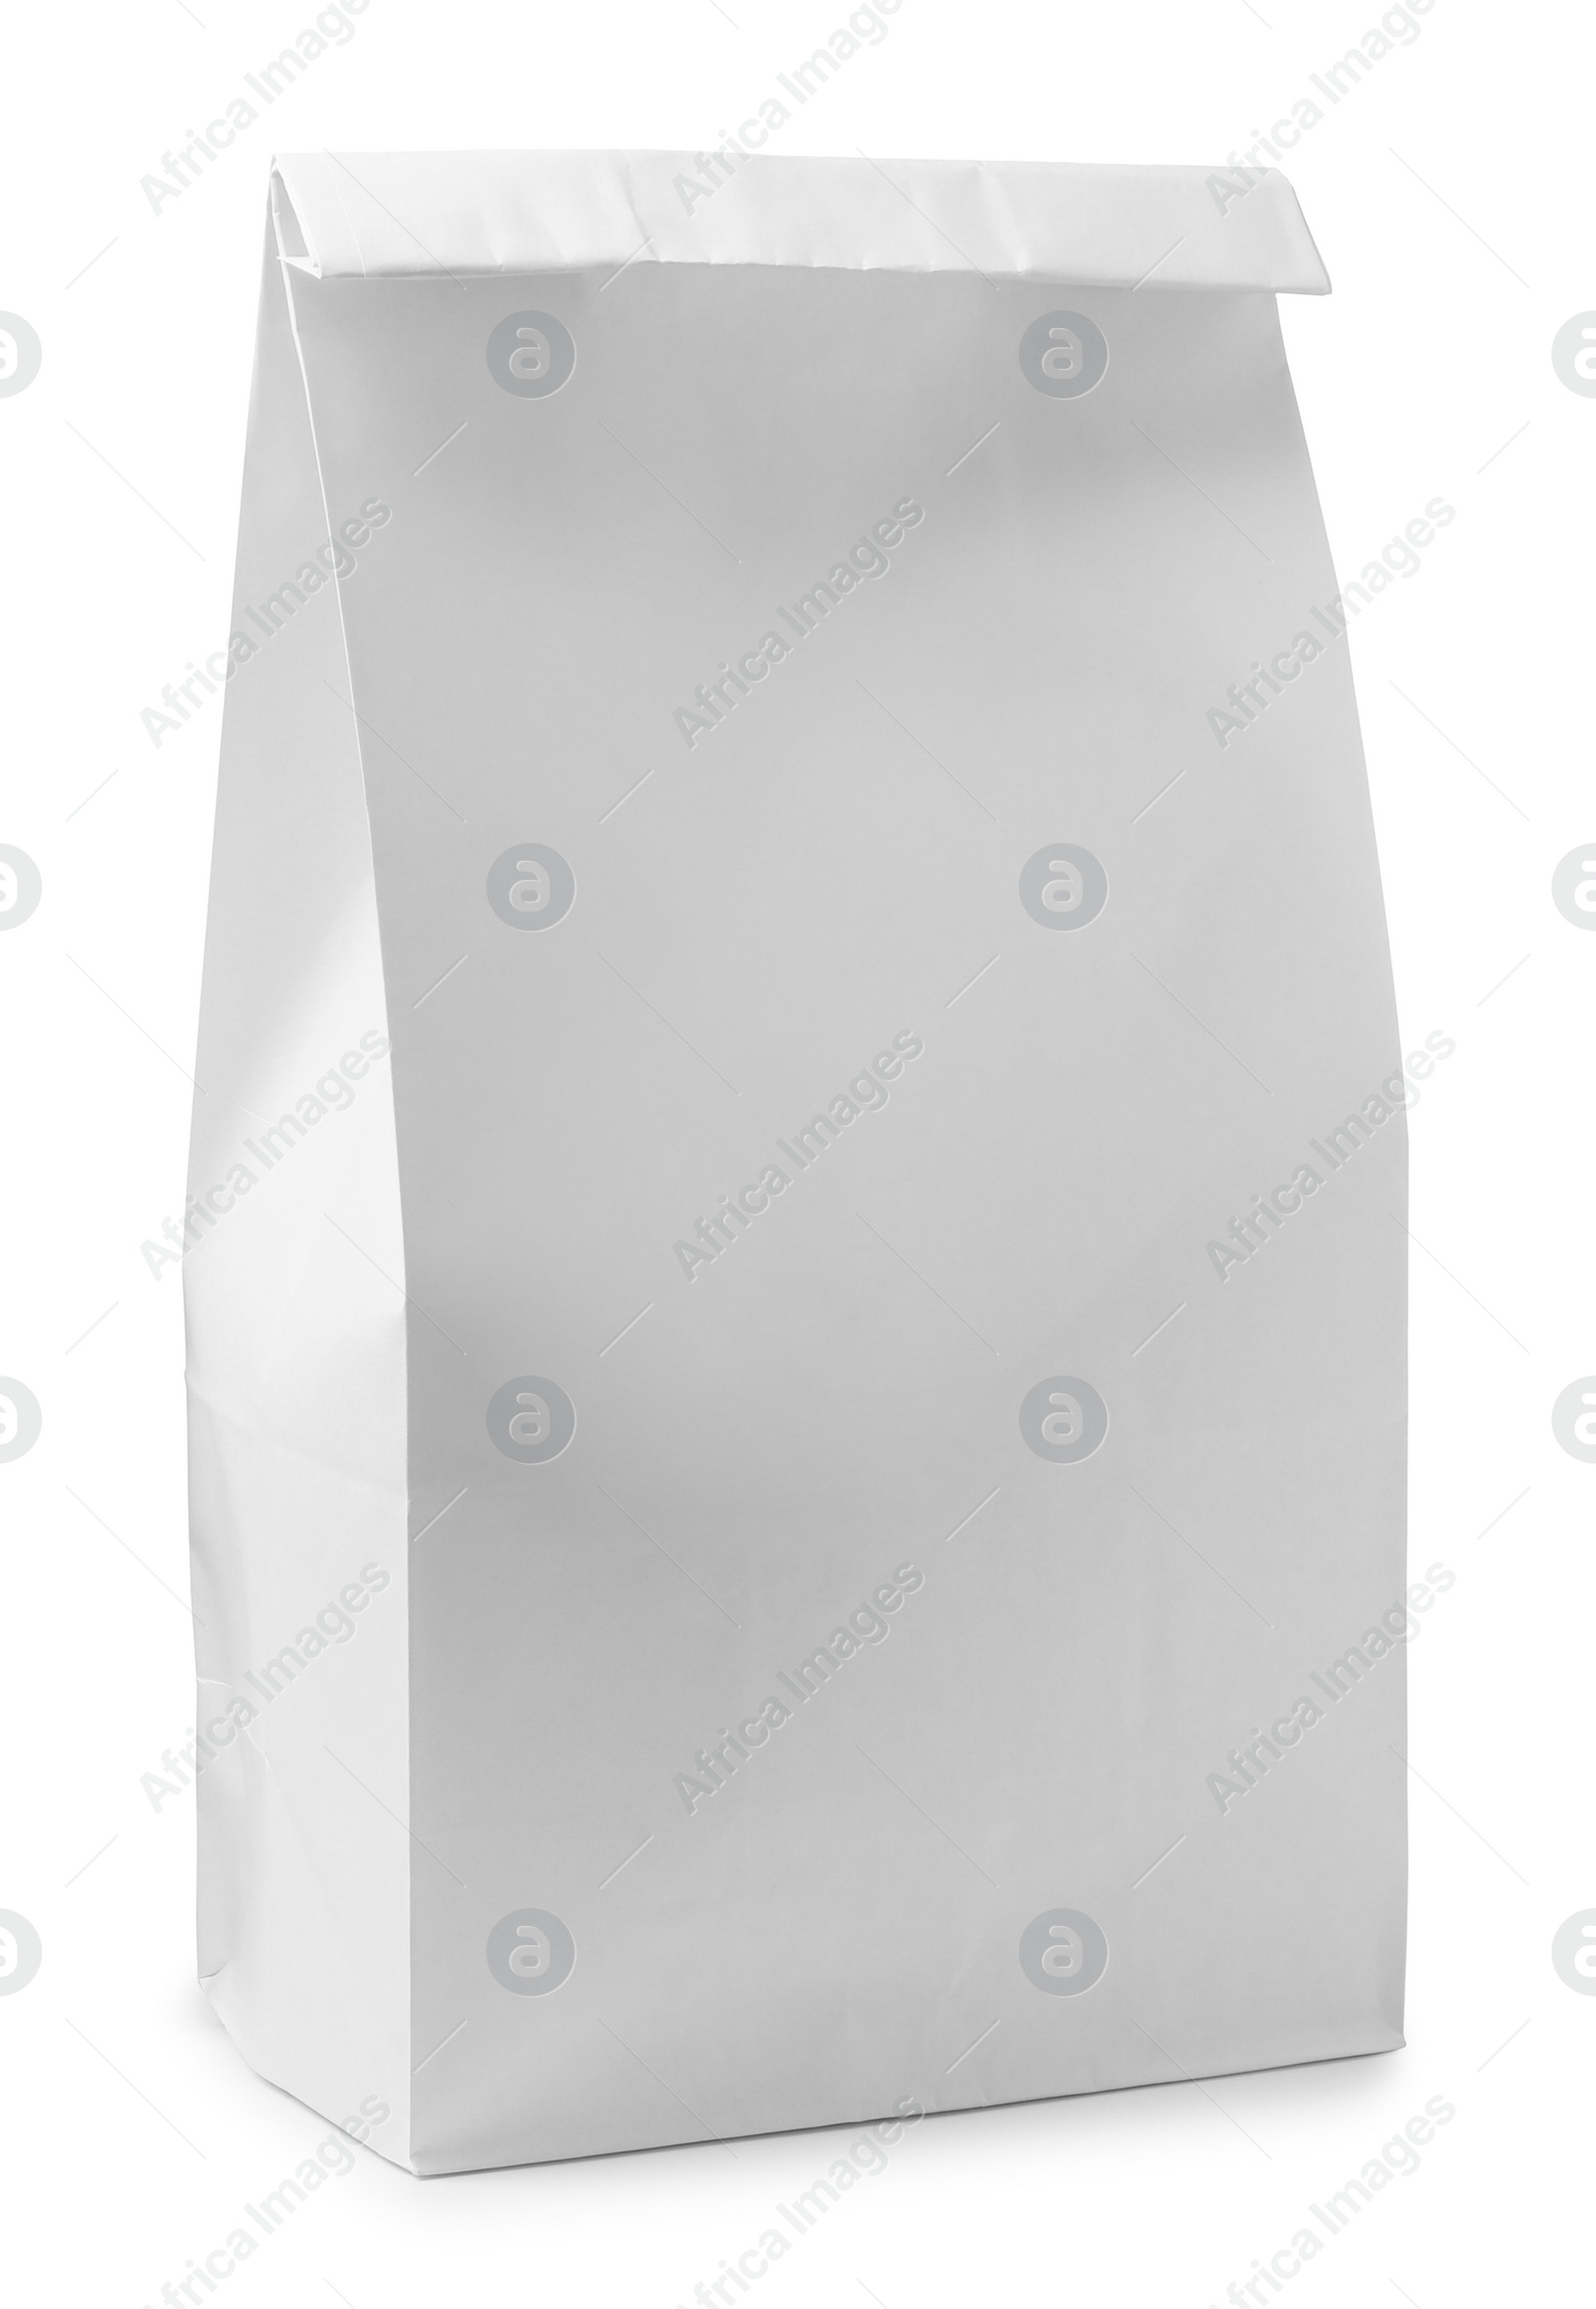 Photo of Closed paper grocery bag isolated on white